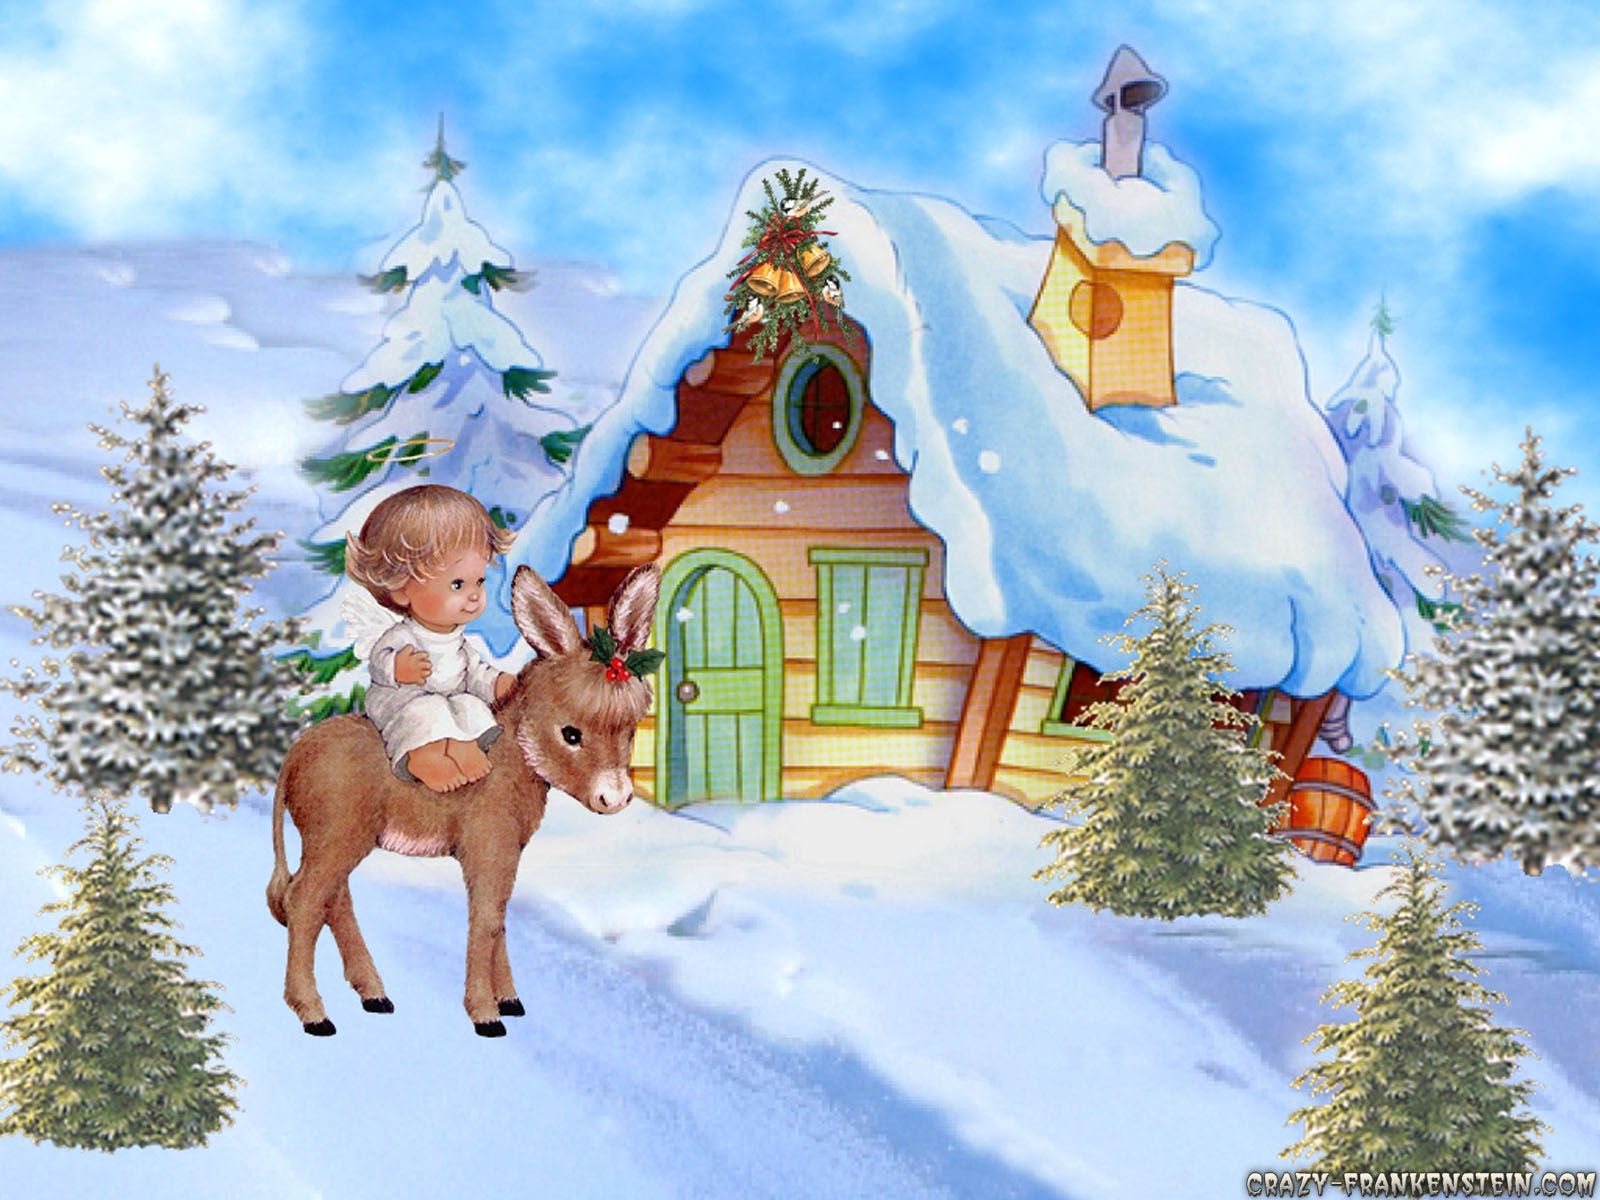 little-angle-old-christmas-wallpapers-1600x1200.jpg (1600×1200) | A ...